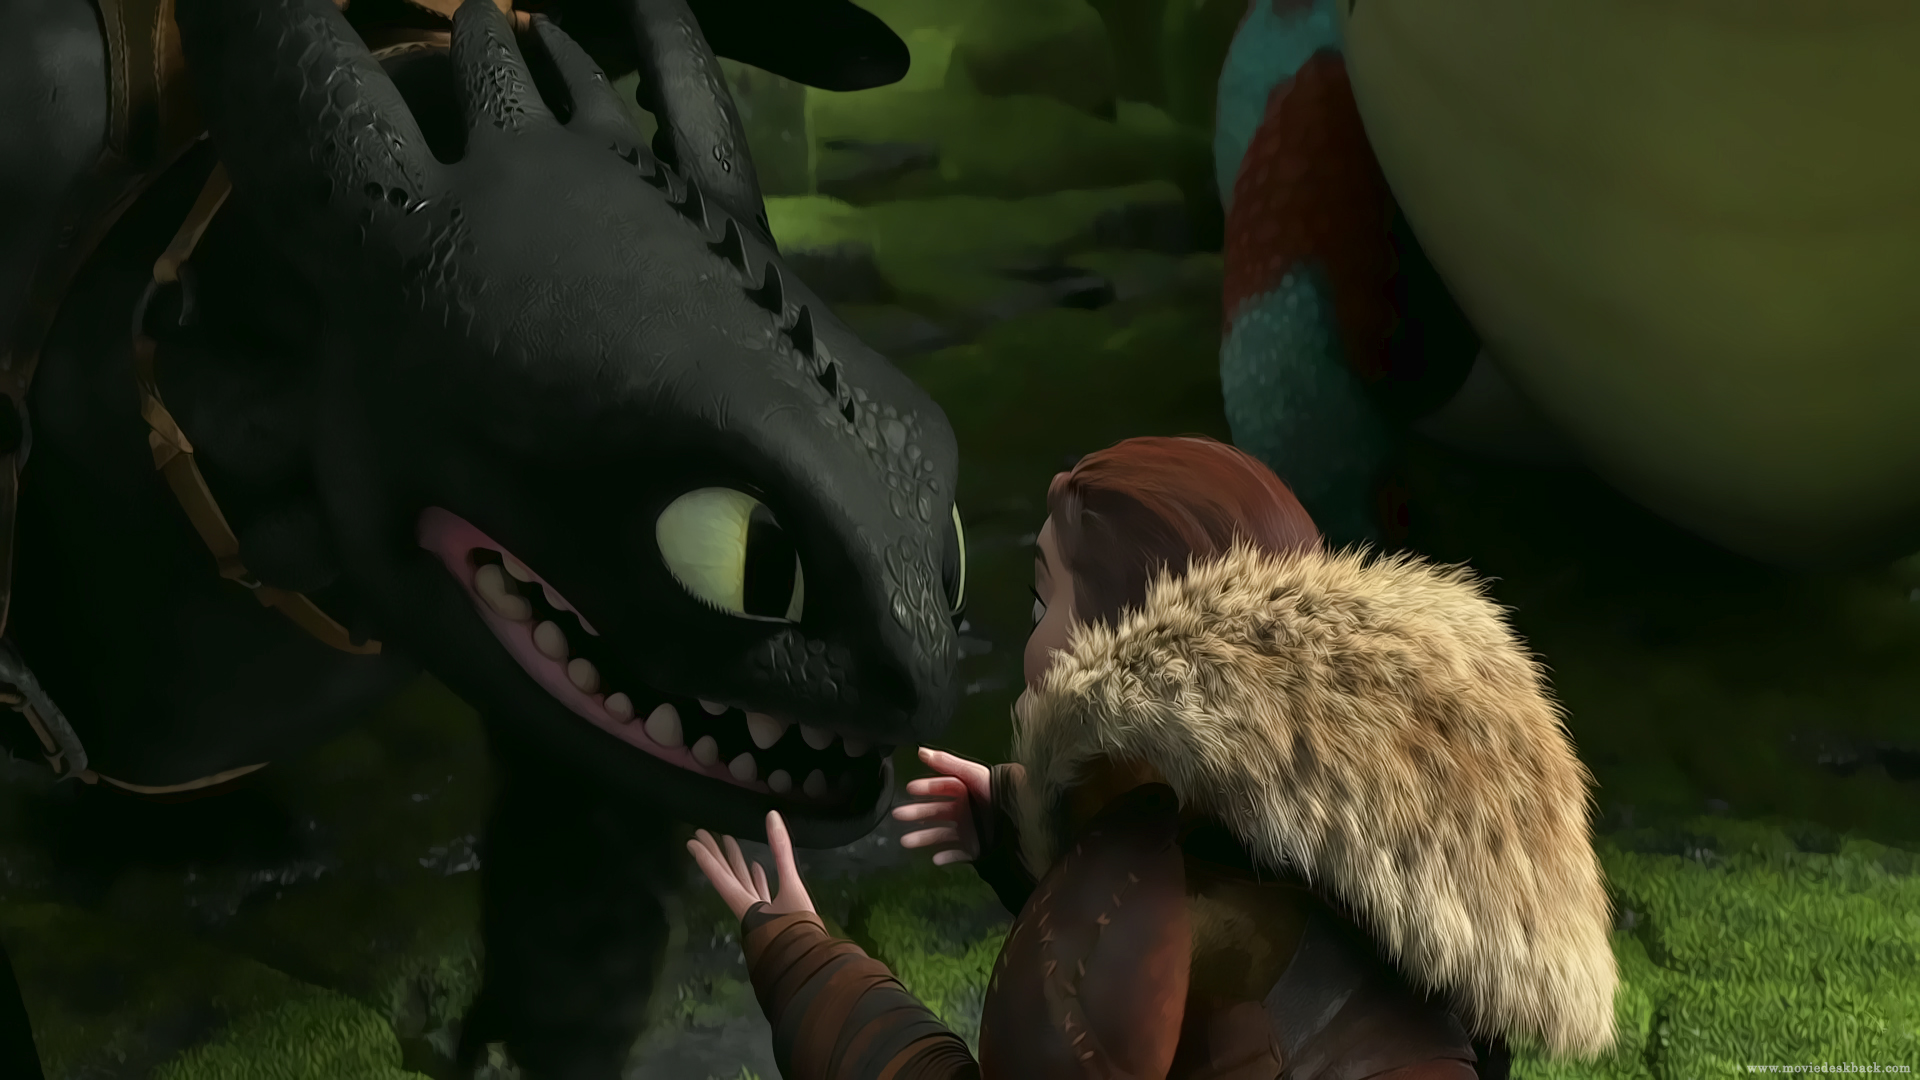 How To Train Your Dragon 2 - HD Wallpaper 